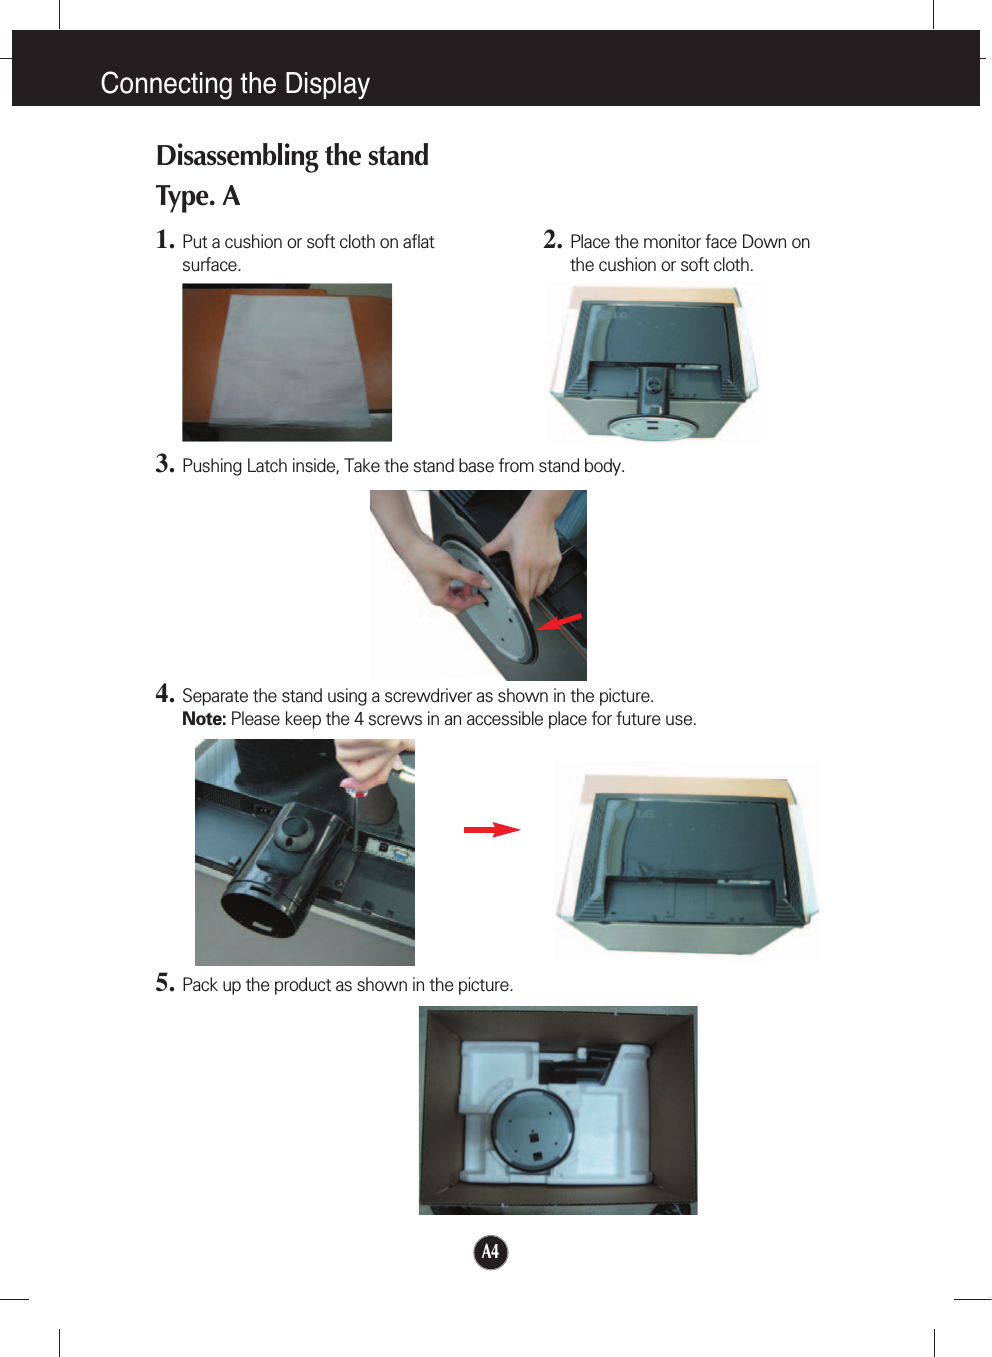 Connecting the DisplayDisassembling the standType. A1. Put a cushion or soft cloth on aflatsurface.3. Pushing Latch inside, Take the stand base from stand body.5. Pack up the product as shown in the picture.4. Separate the stand using a screwdriver as shown in the picture.Note: Please keep the 4 screws in an accessible place for future use.2. Place the monitor face Down onthe cushion or soft cloth.A4